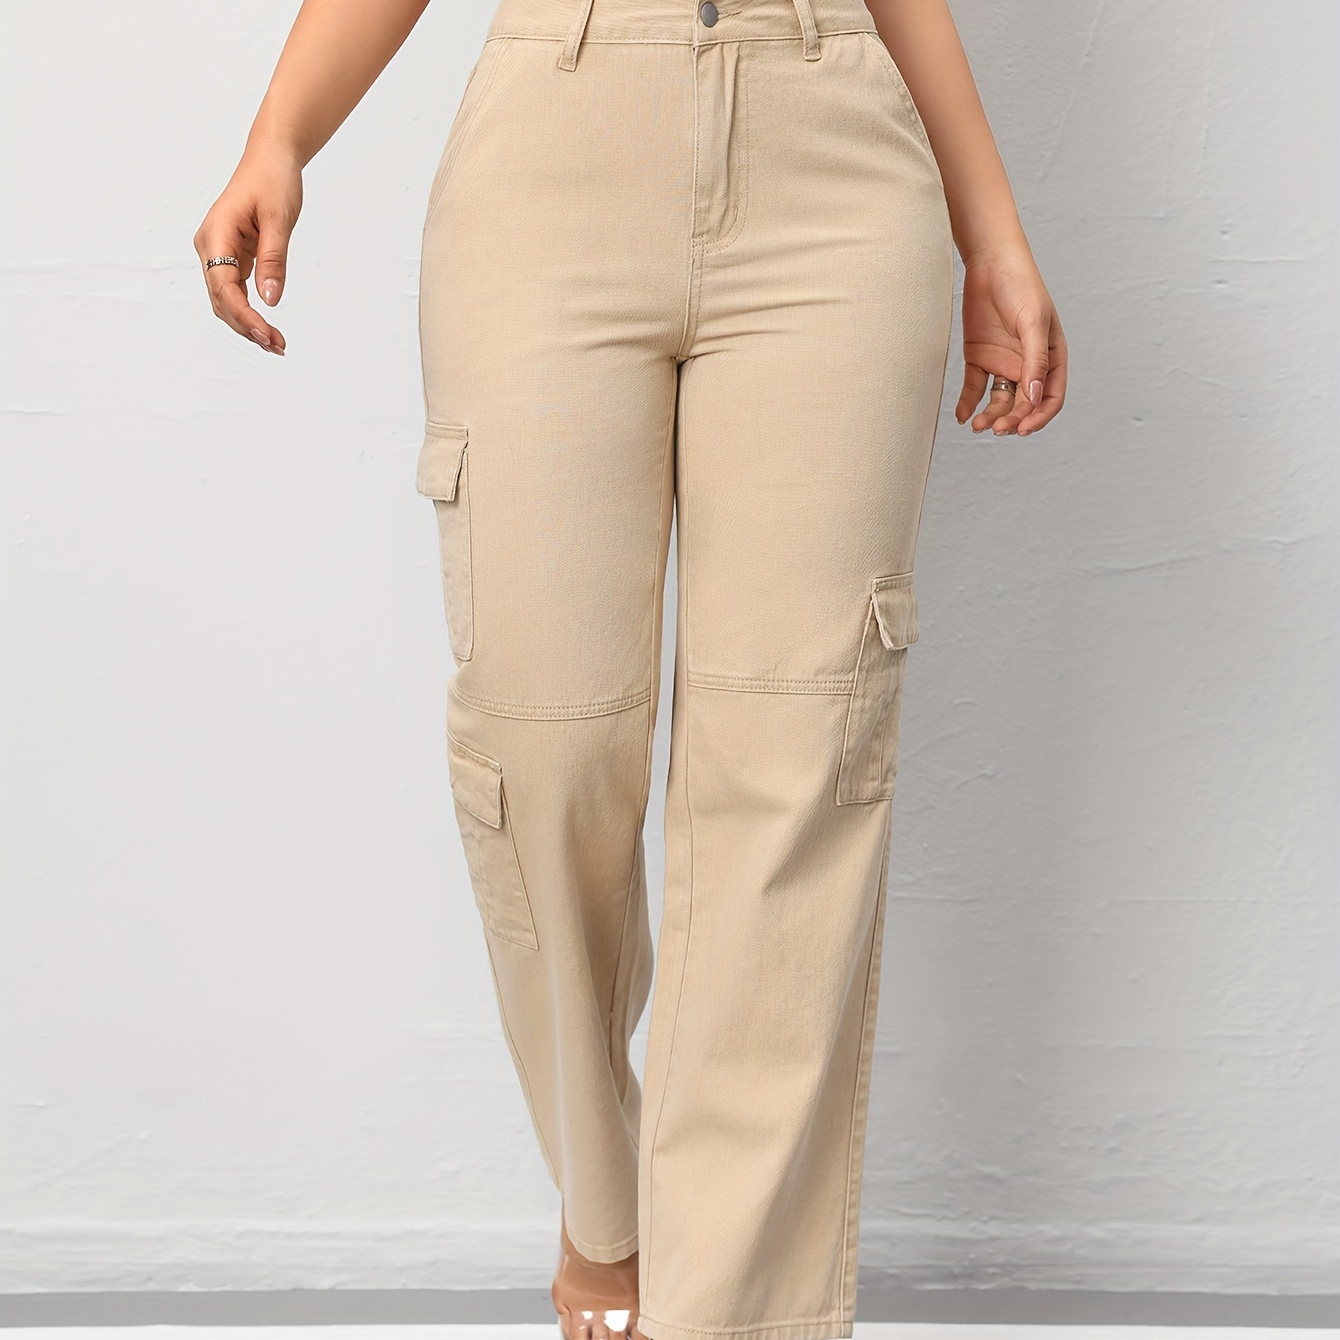 

Women's Casual Denim Cargo Pants With Pockets, Beige Full-length Straight-leg Jeans For Everyday Wear